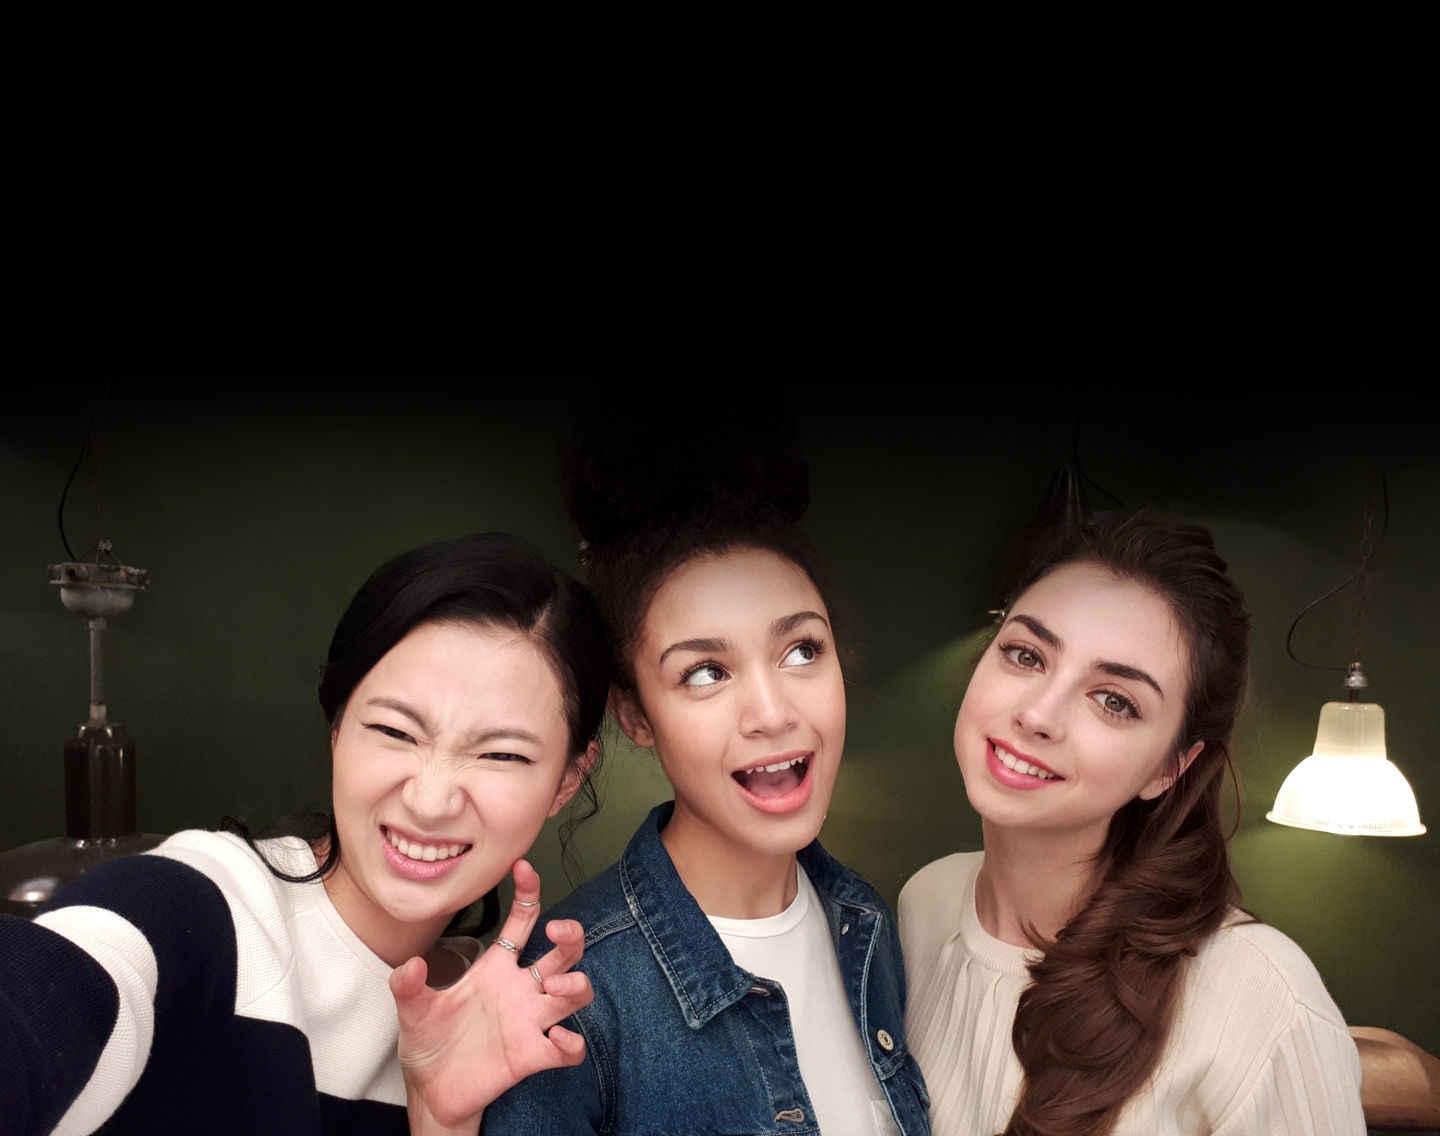 Selfie image of three women taken in low-light to show the advanced camera functionality of the Galaxy A7 (2017).